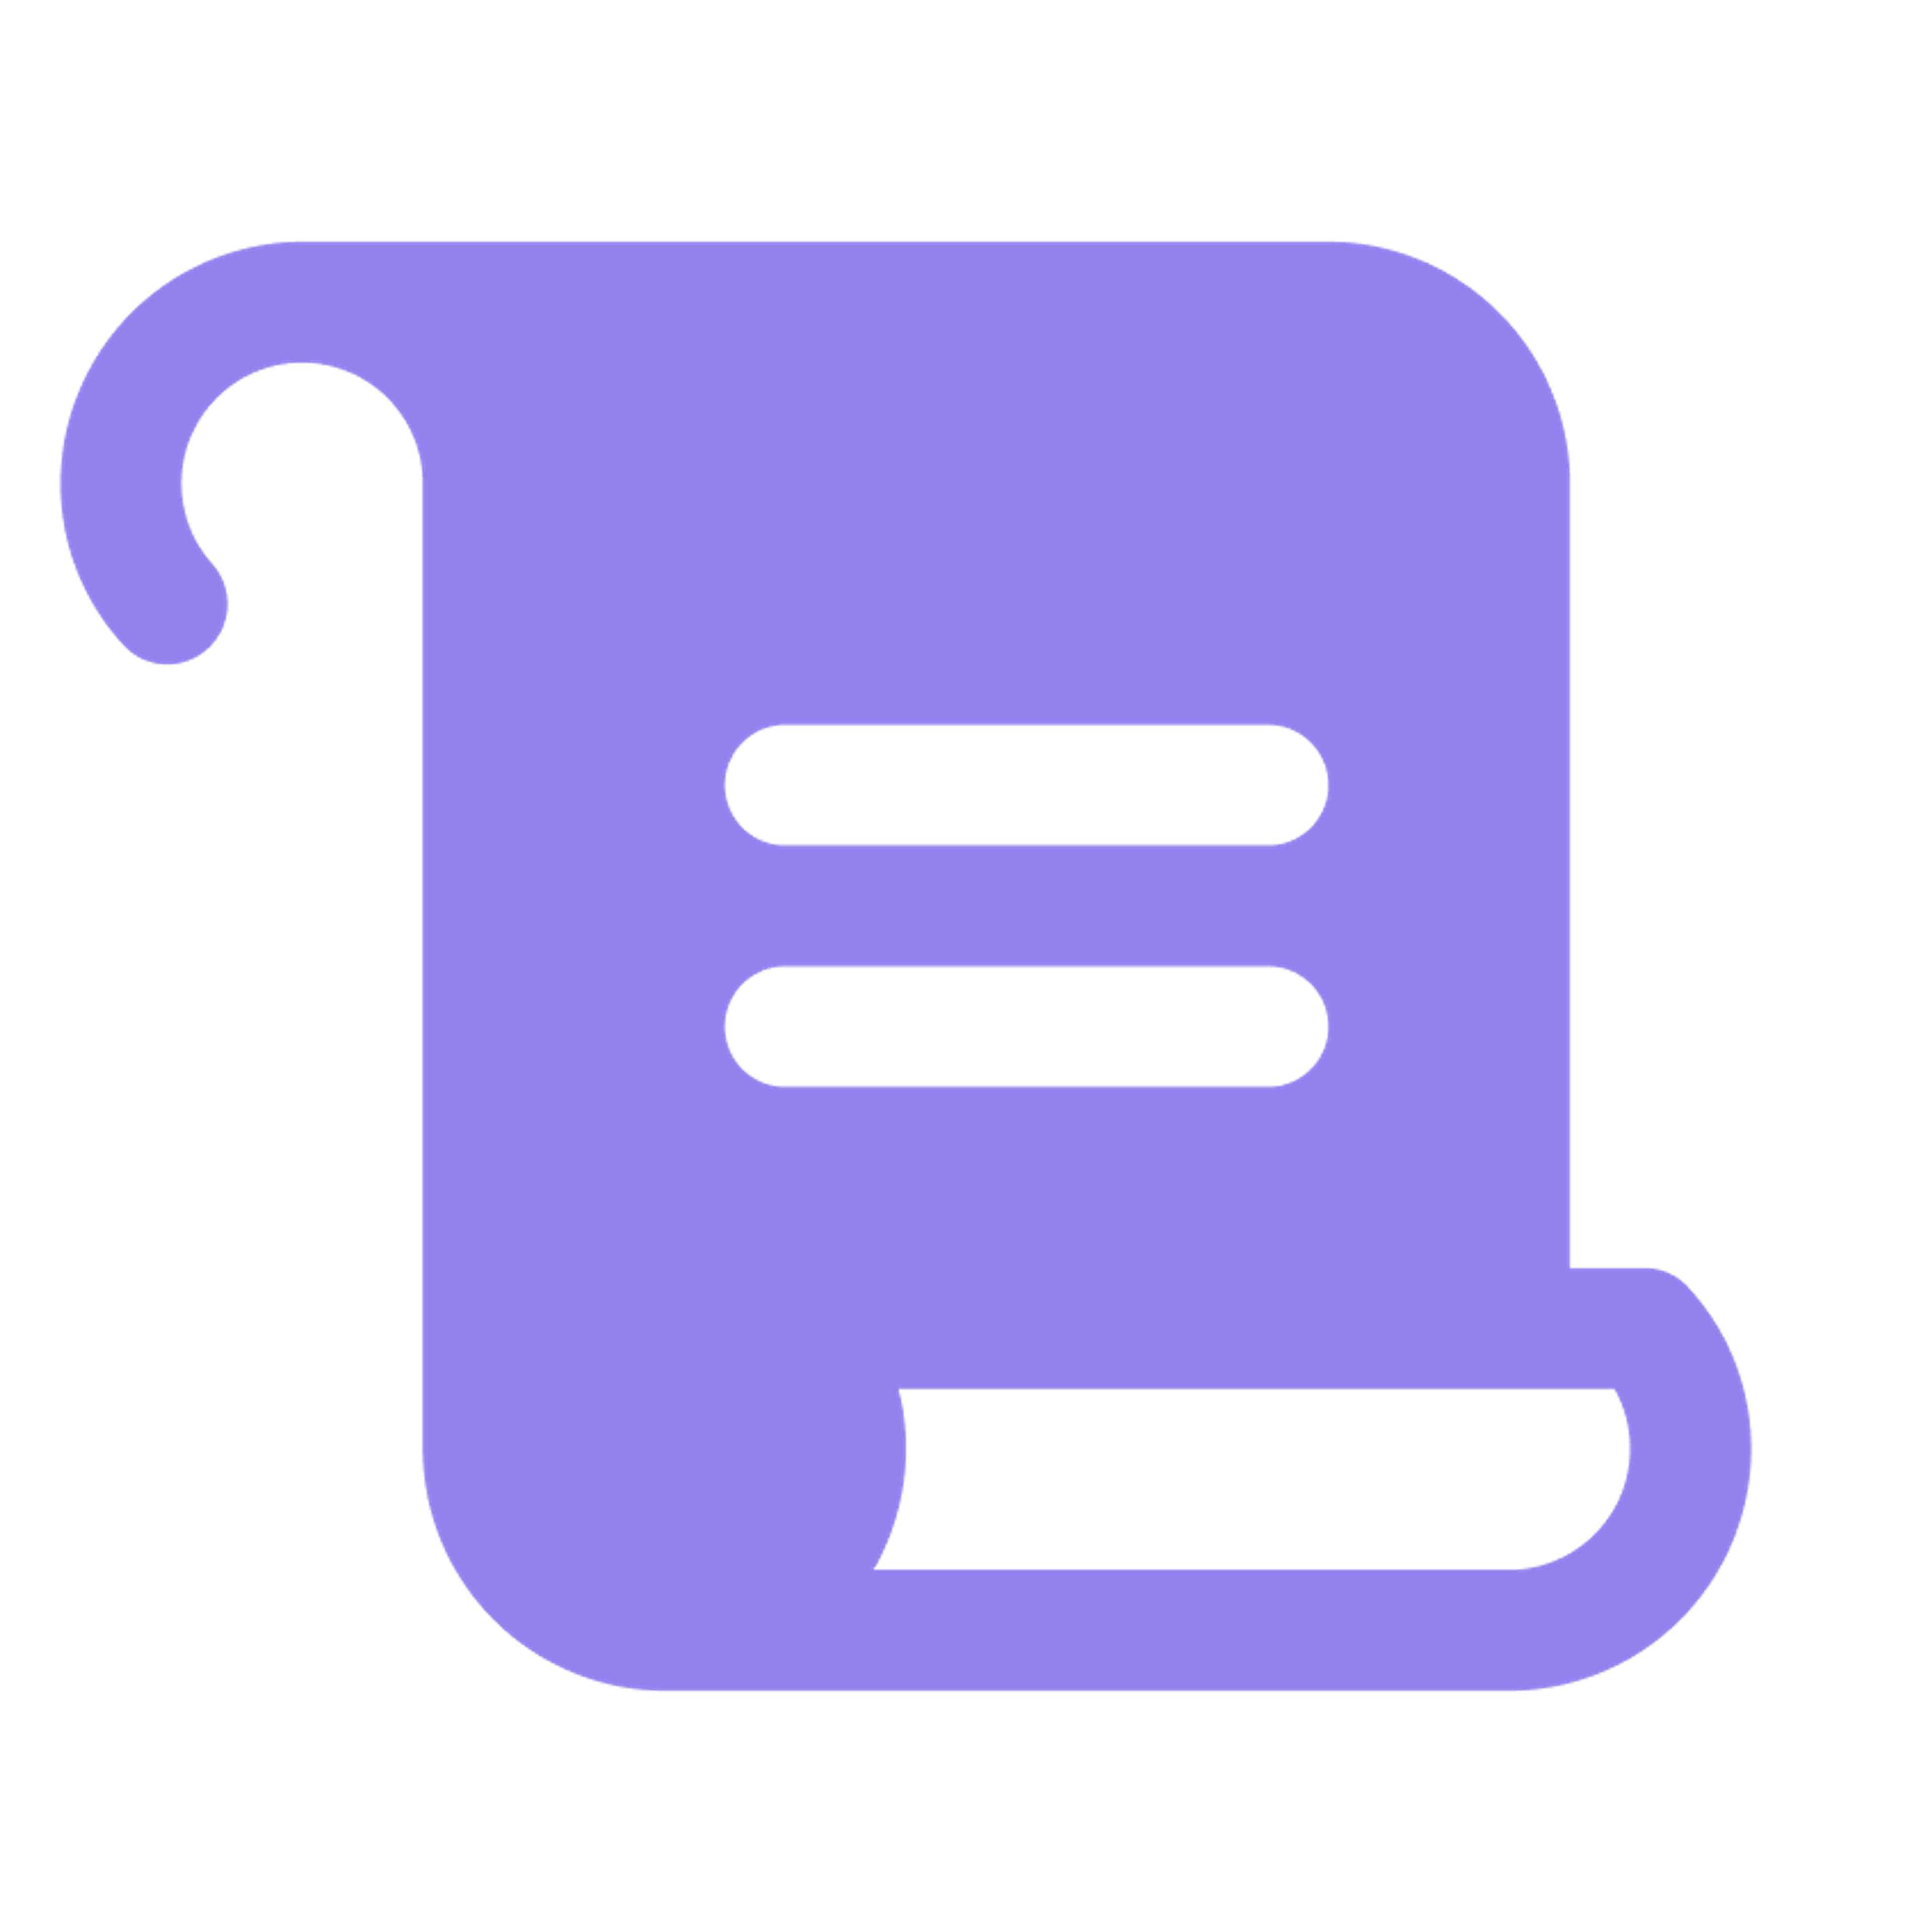 A purple icon of a paper scroll on a transparent background